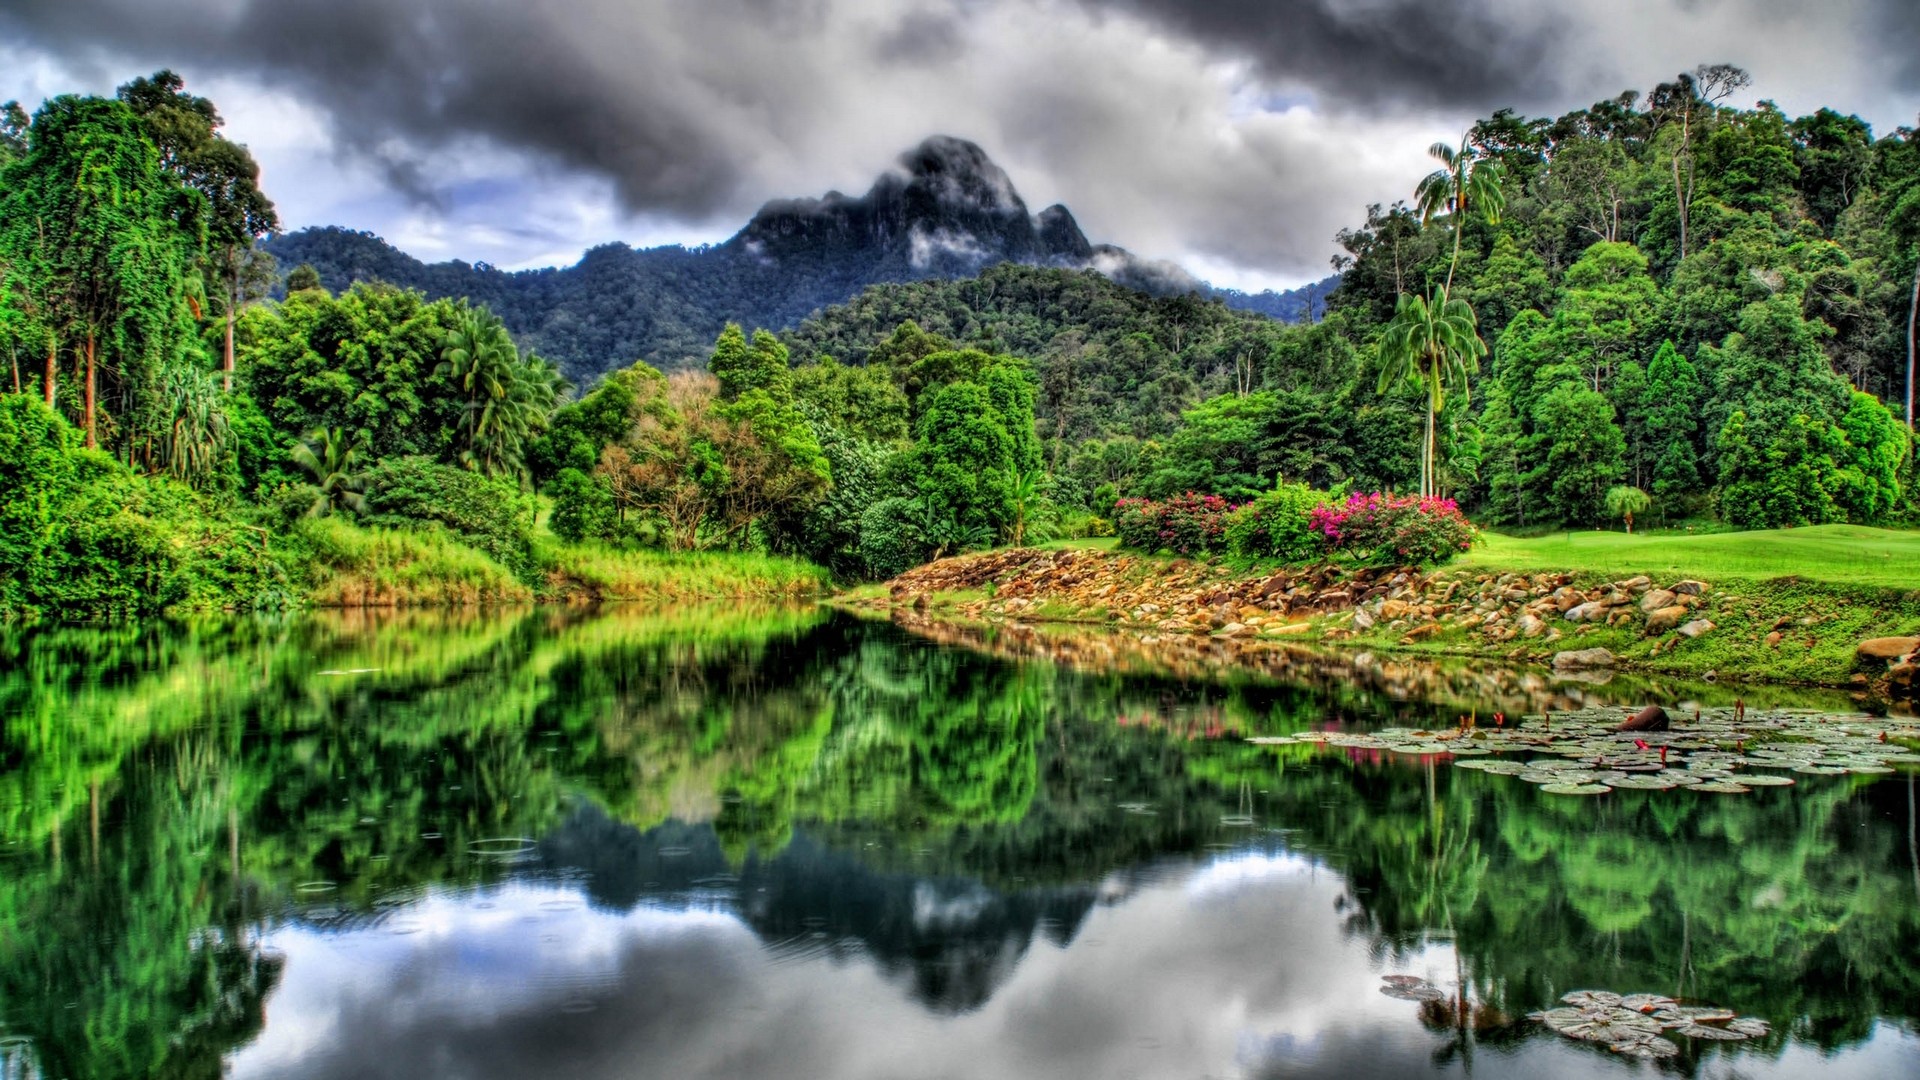 General 1920x1080 nature HDR river overcast tropical forest plants reflection clouds